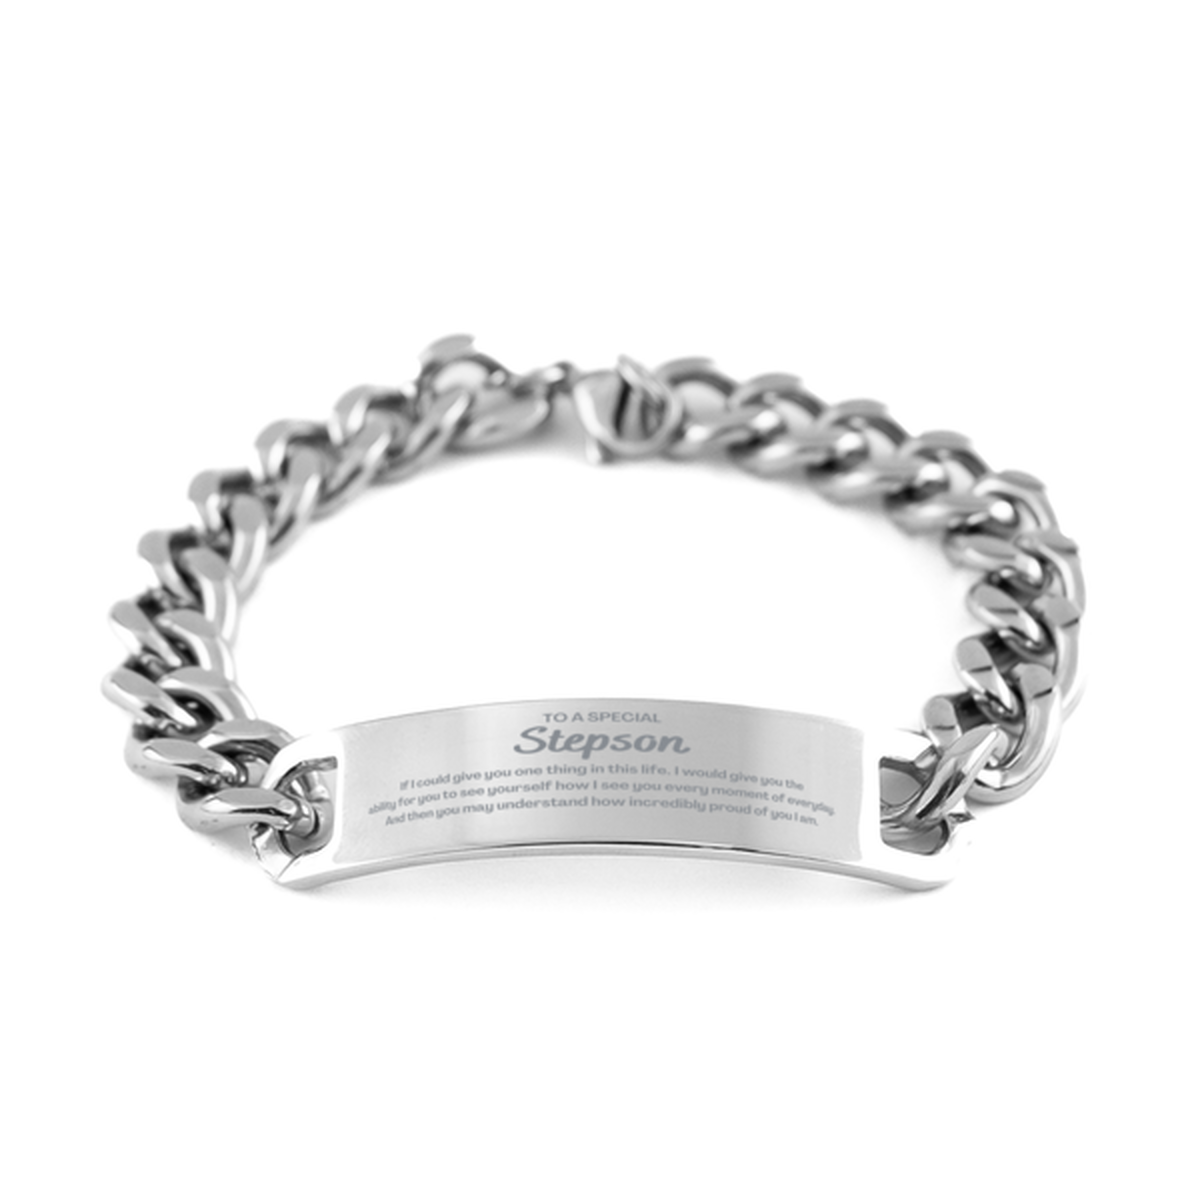 To My Stepson Cuban Chain Stainless Steel Bracelet, Gifts For Stepson Engraved, Inspirational Gifts for Christmas Birthday, Epic Gifts for Stepson To A Special Stepson how incredibly proud of you I am